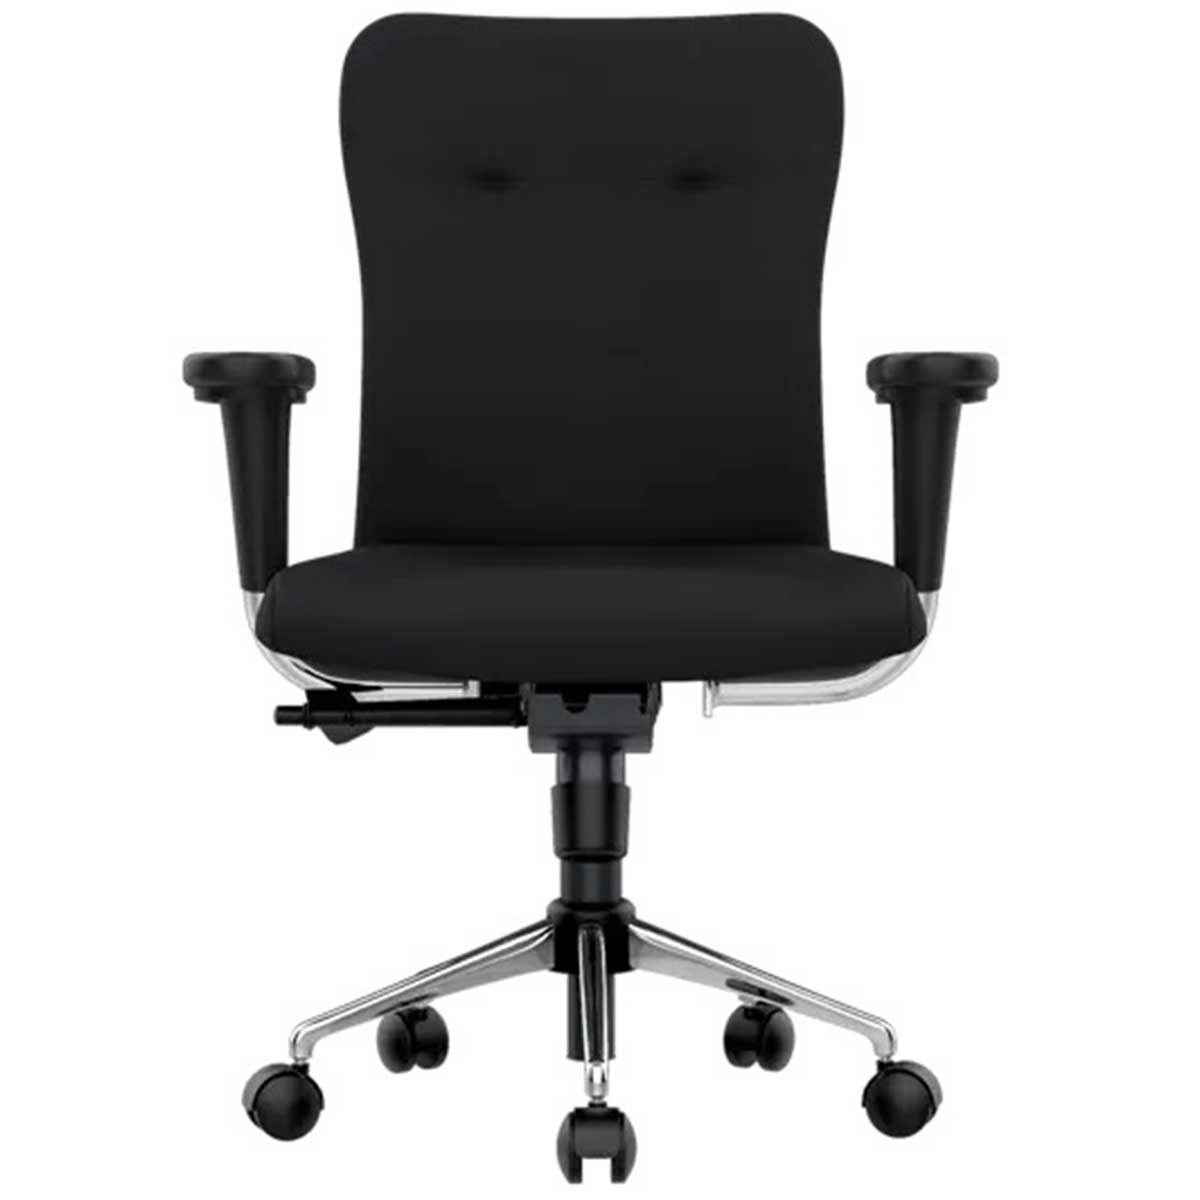 Fabric Office Chair Manufacturers, Suppliers in Faridabad